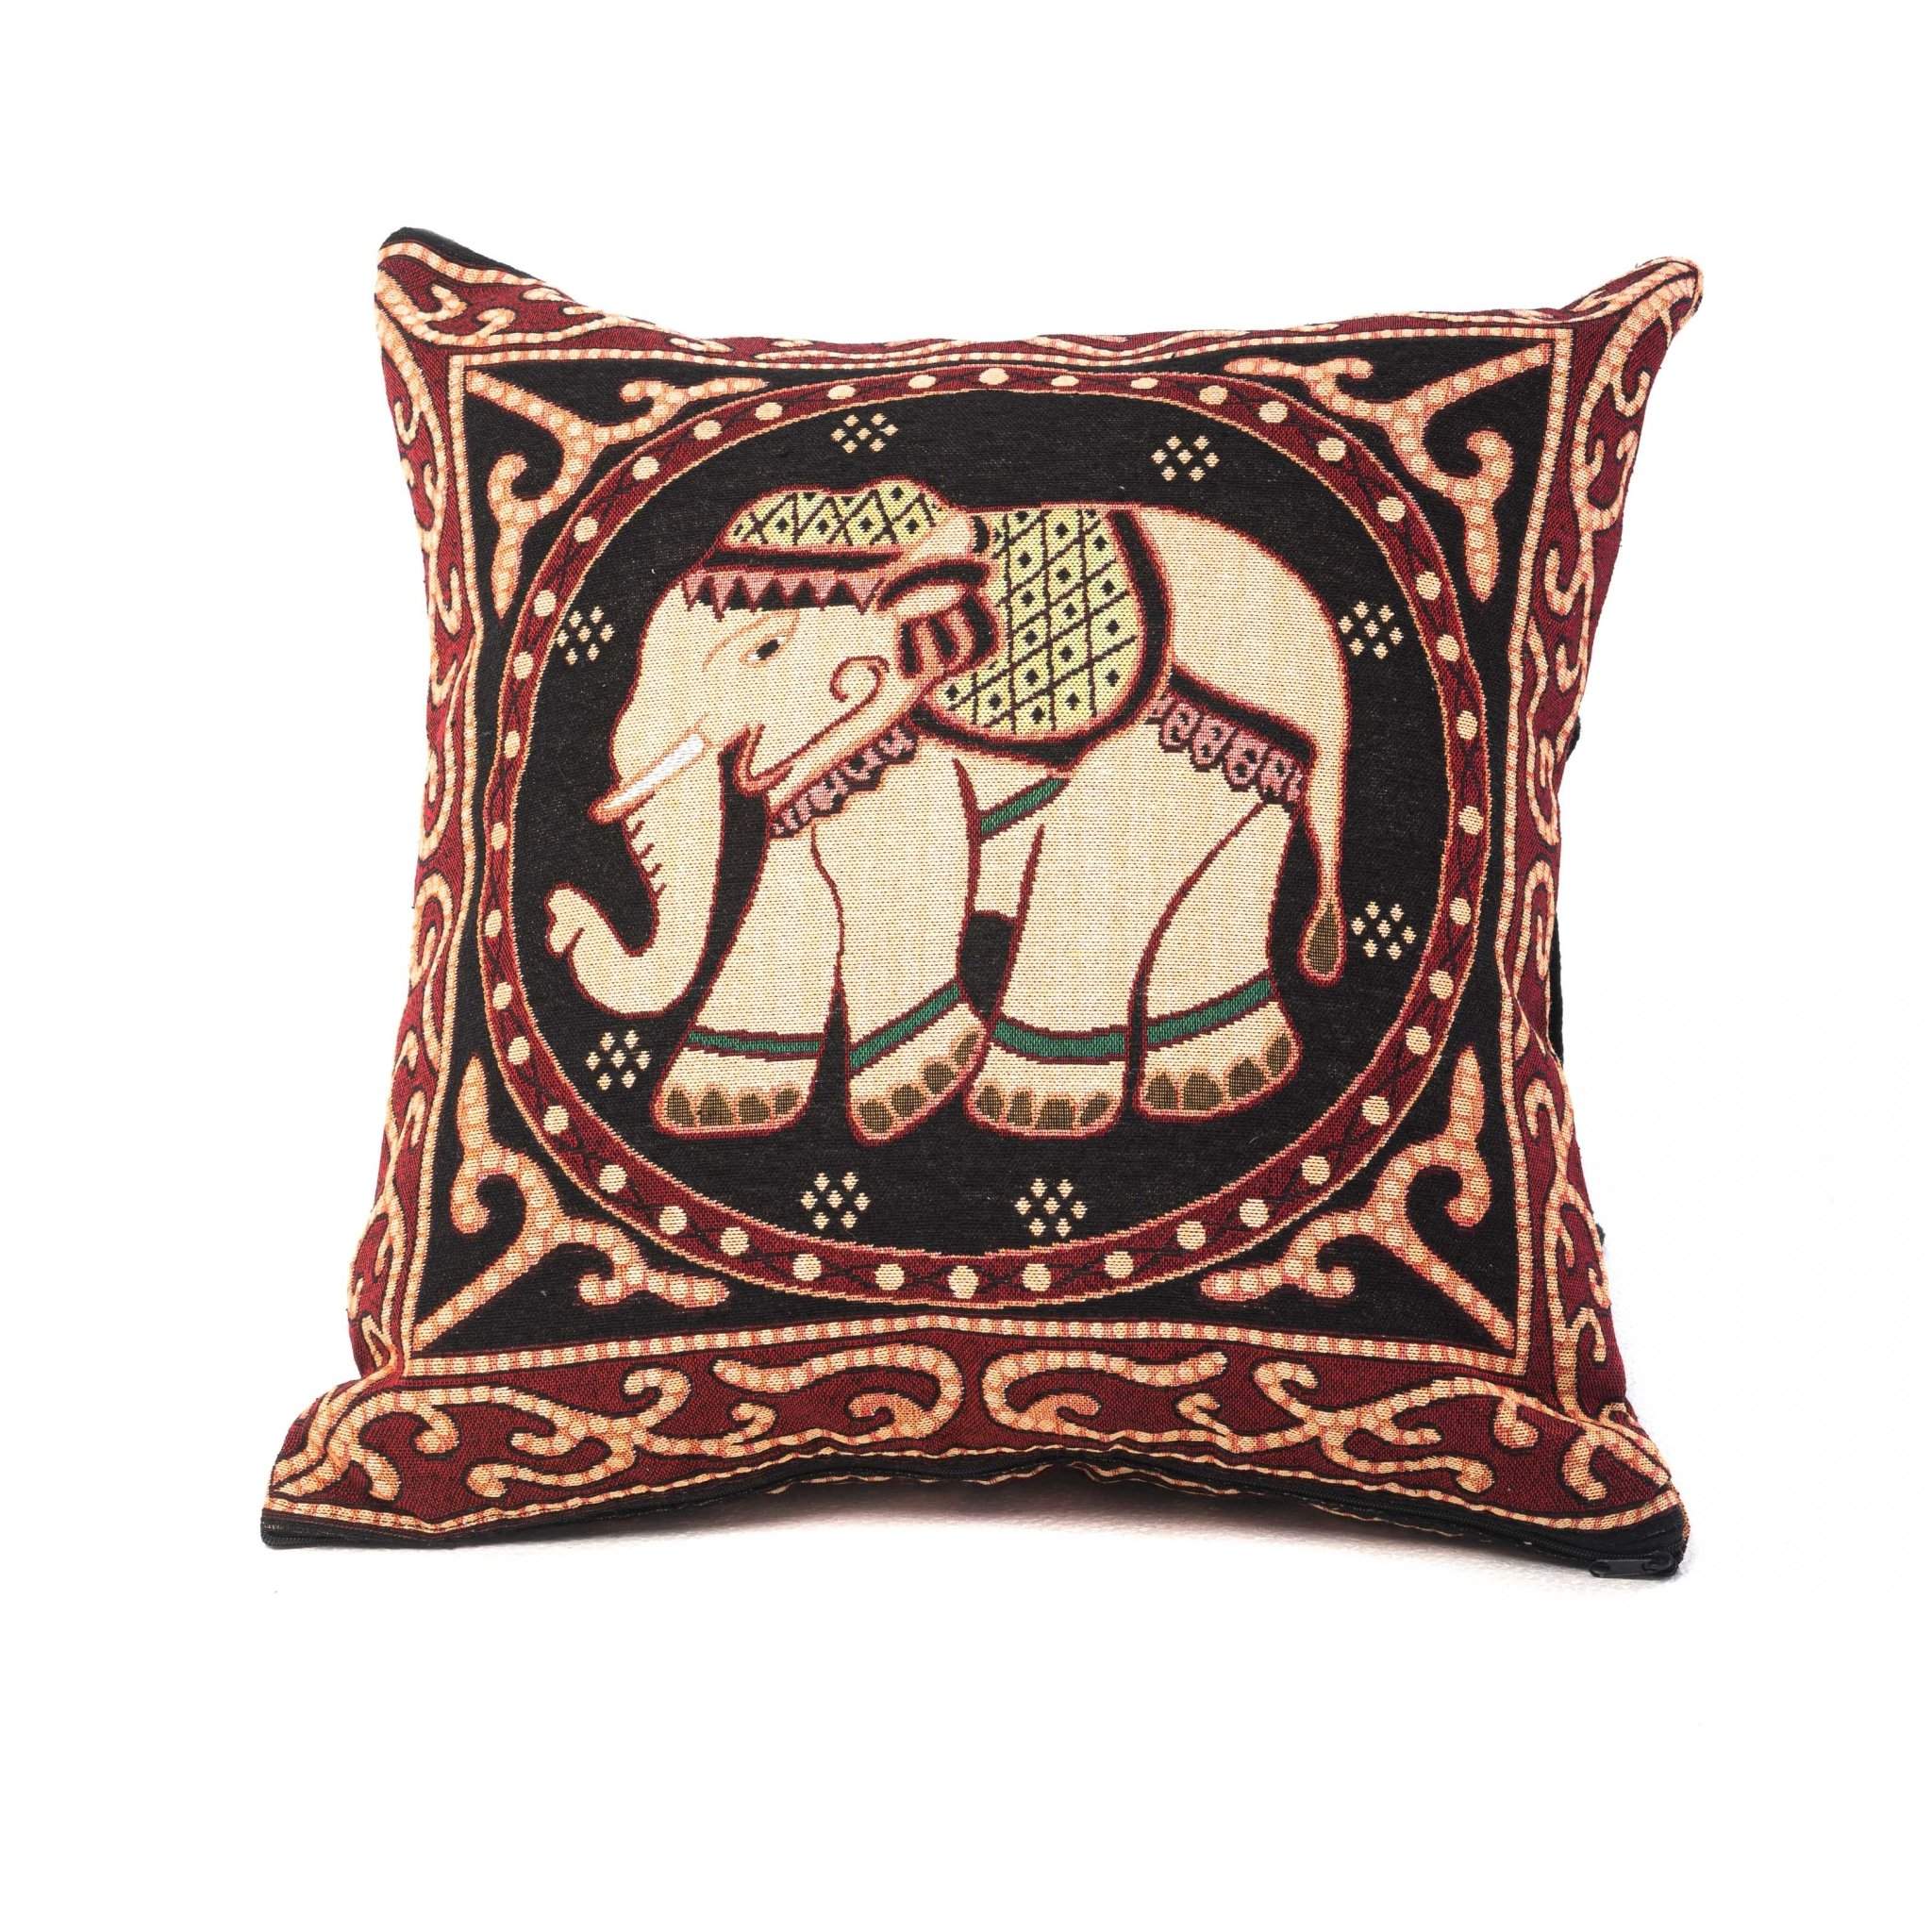 ANGKOR PILLOW COVER Elepanta Pillows - Buy Today Elephant Pants Jewelry And Bohemian Clothes Handmade In Thailand Help To Save The Elephants FairTrade And Vegan